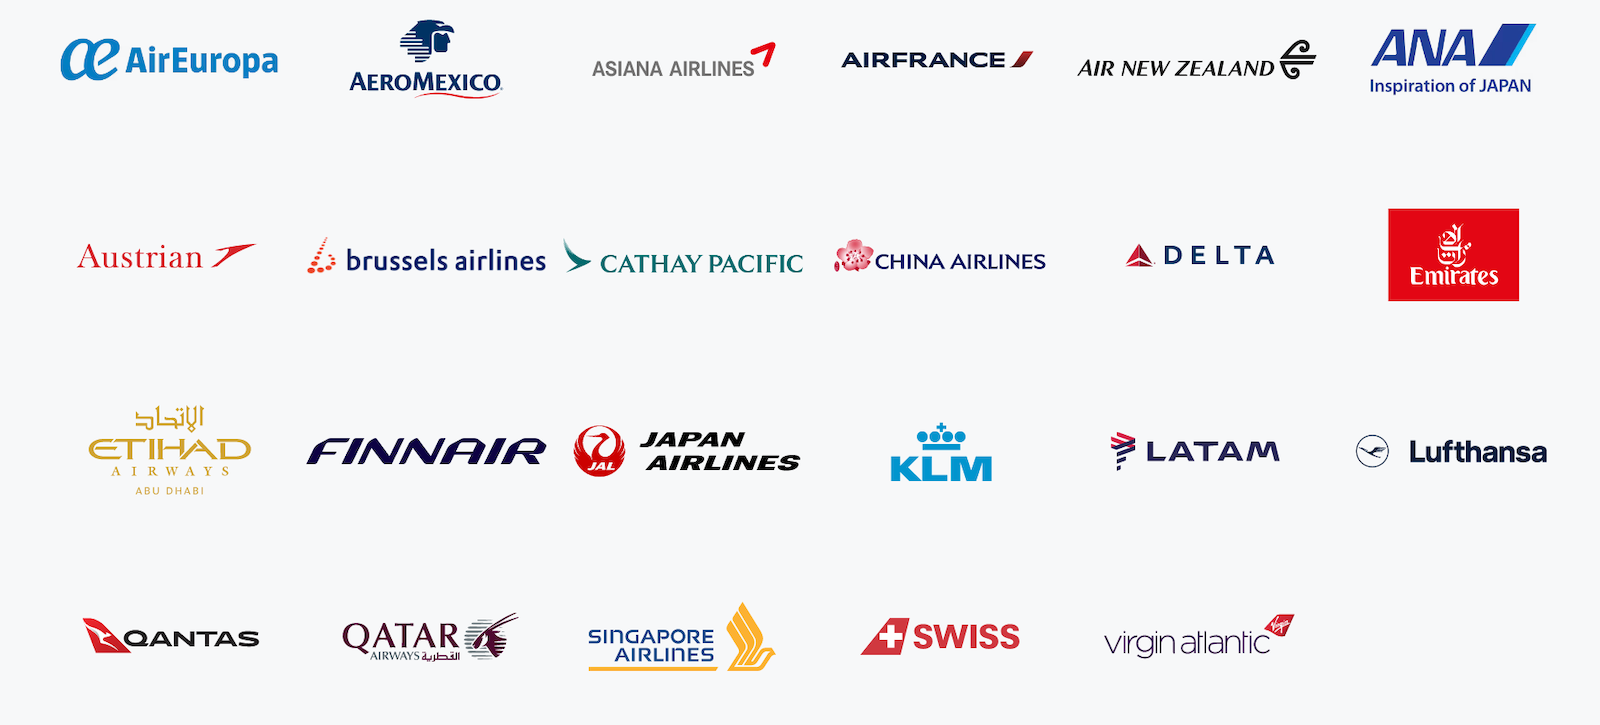 airline logos for the airlines participating in the Amex International Airline Program